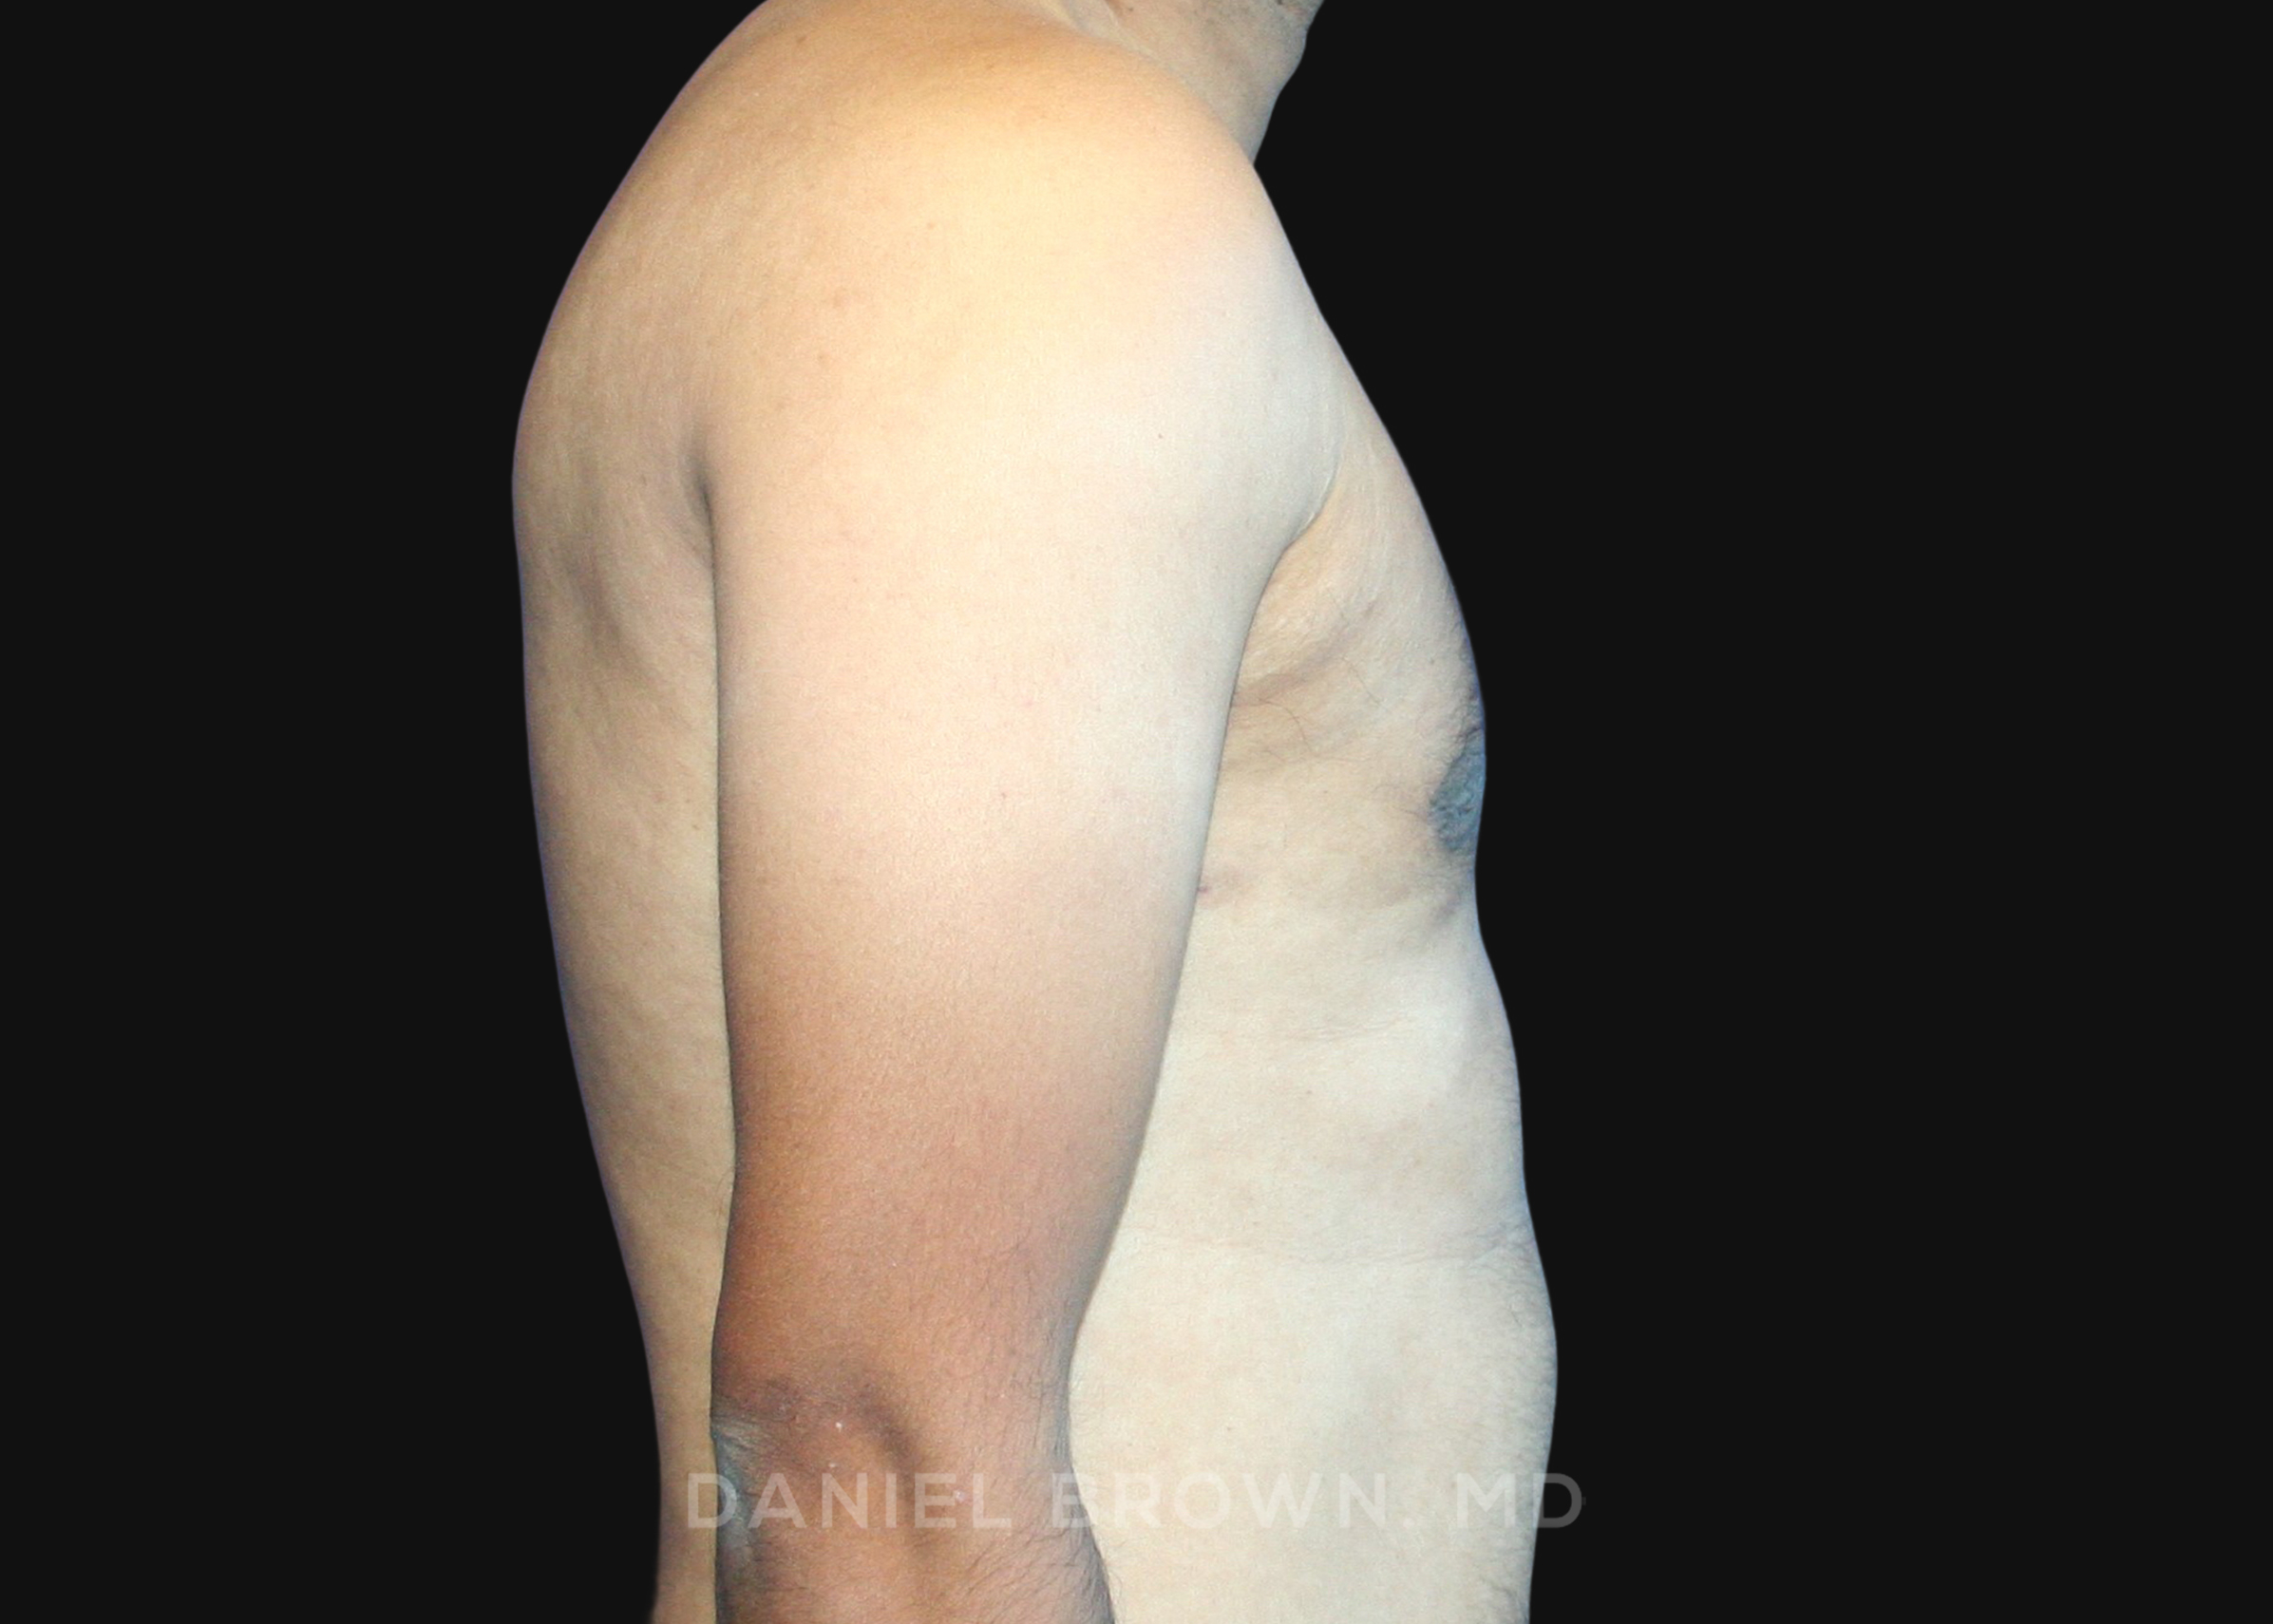 Gynecomastia Patient Photo - Case 2713 - after view